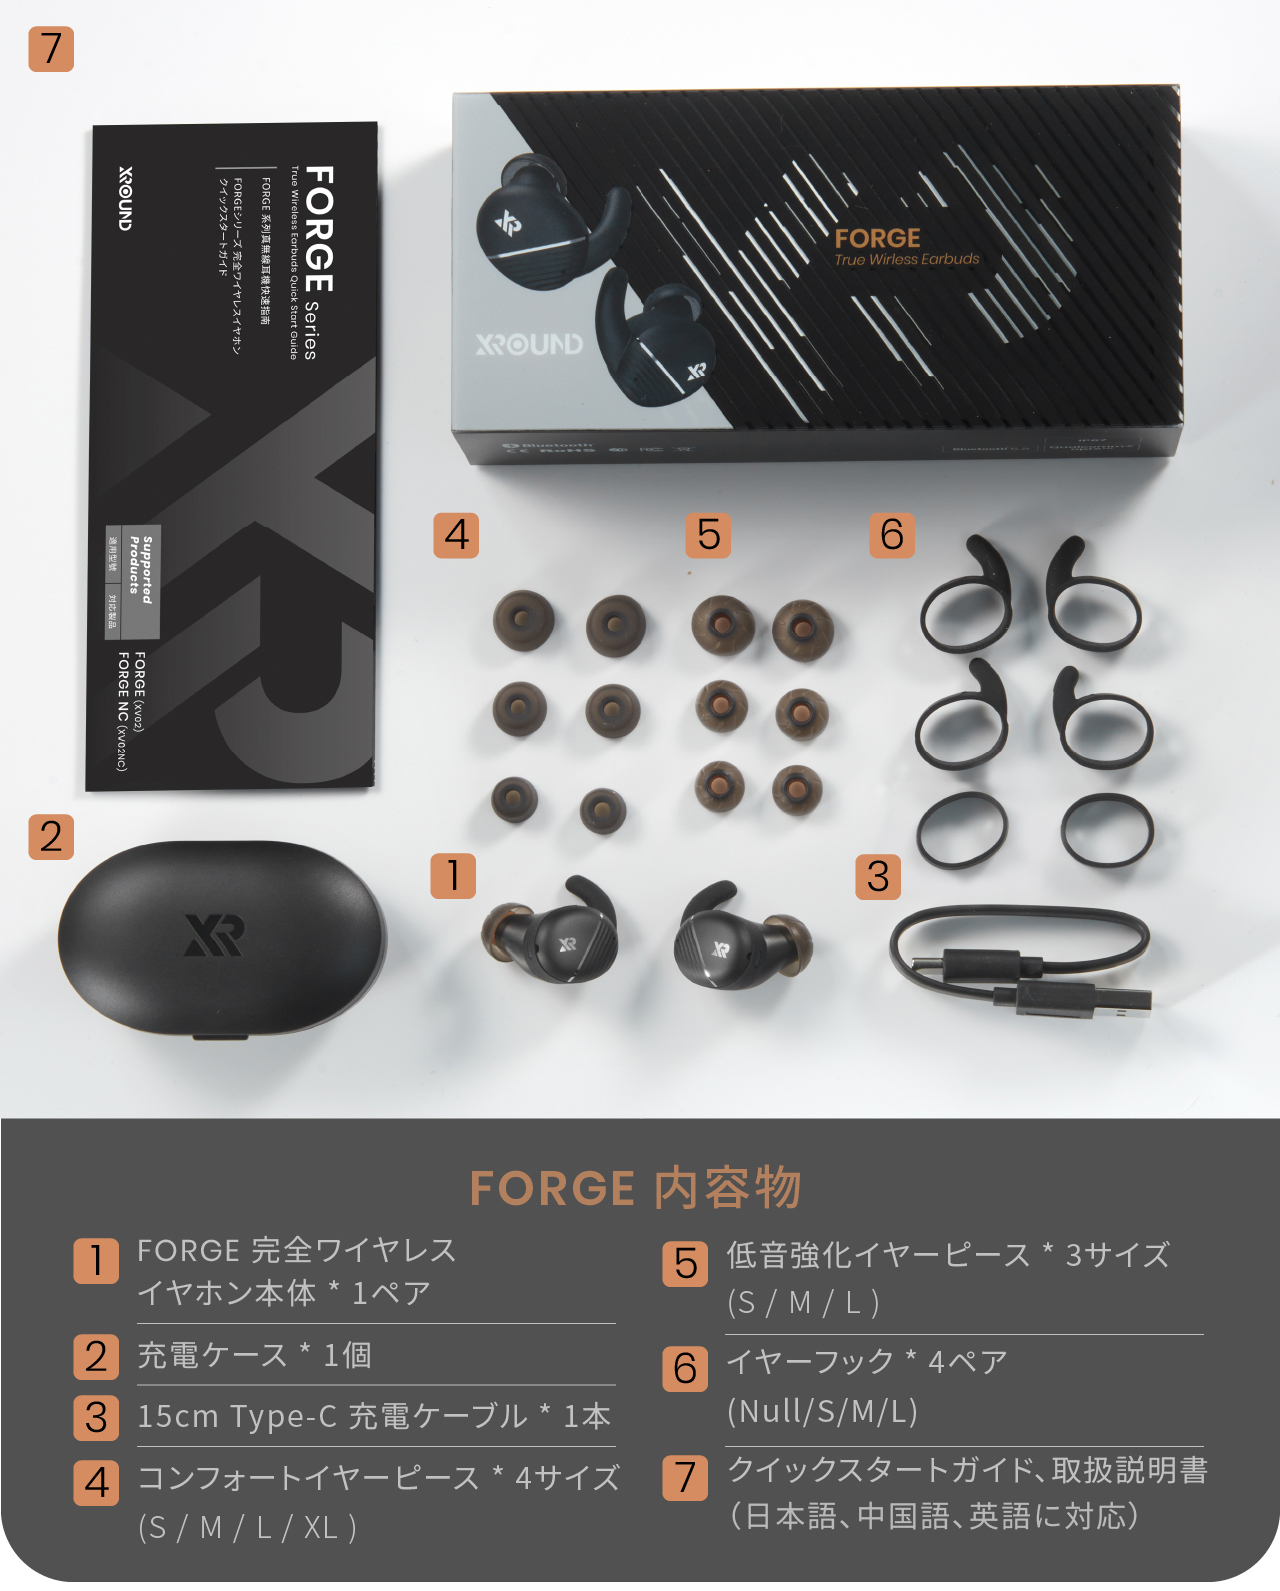 FORGE package